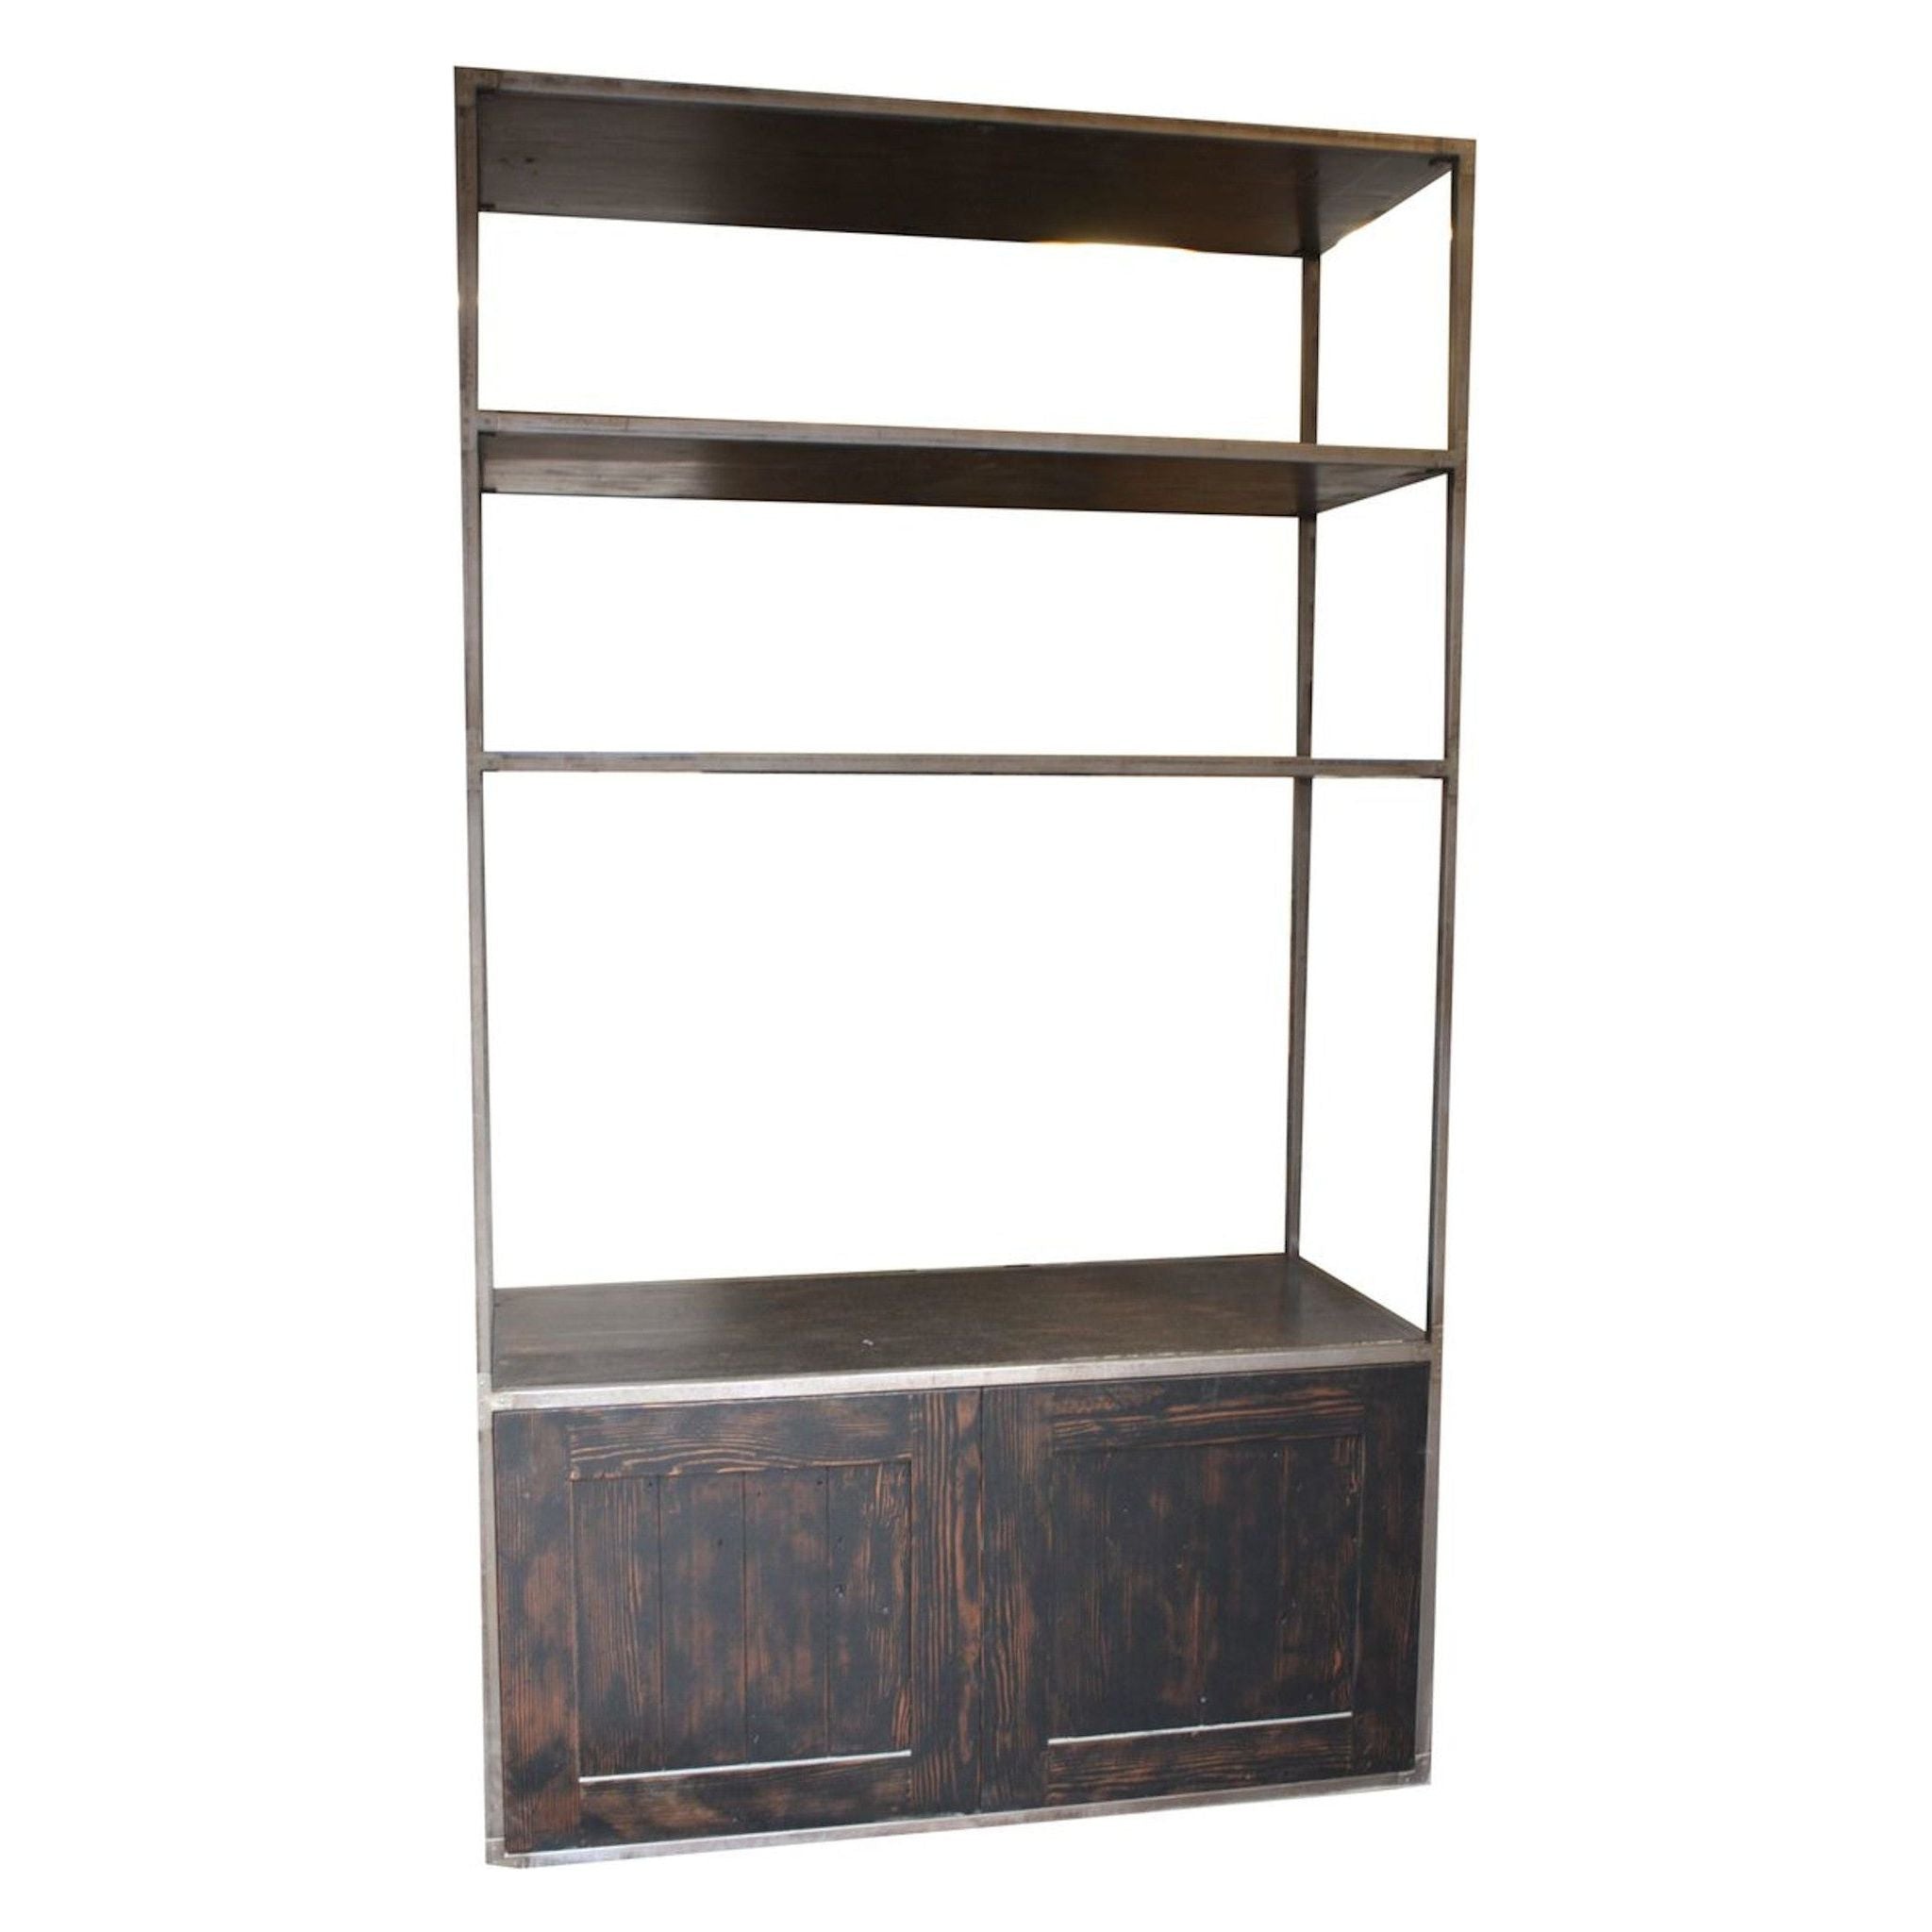 New York Metal and Reclaimed Wood Bookcase